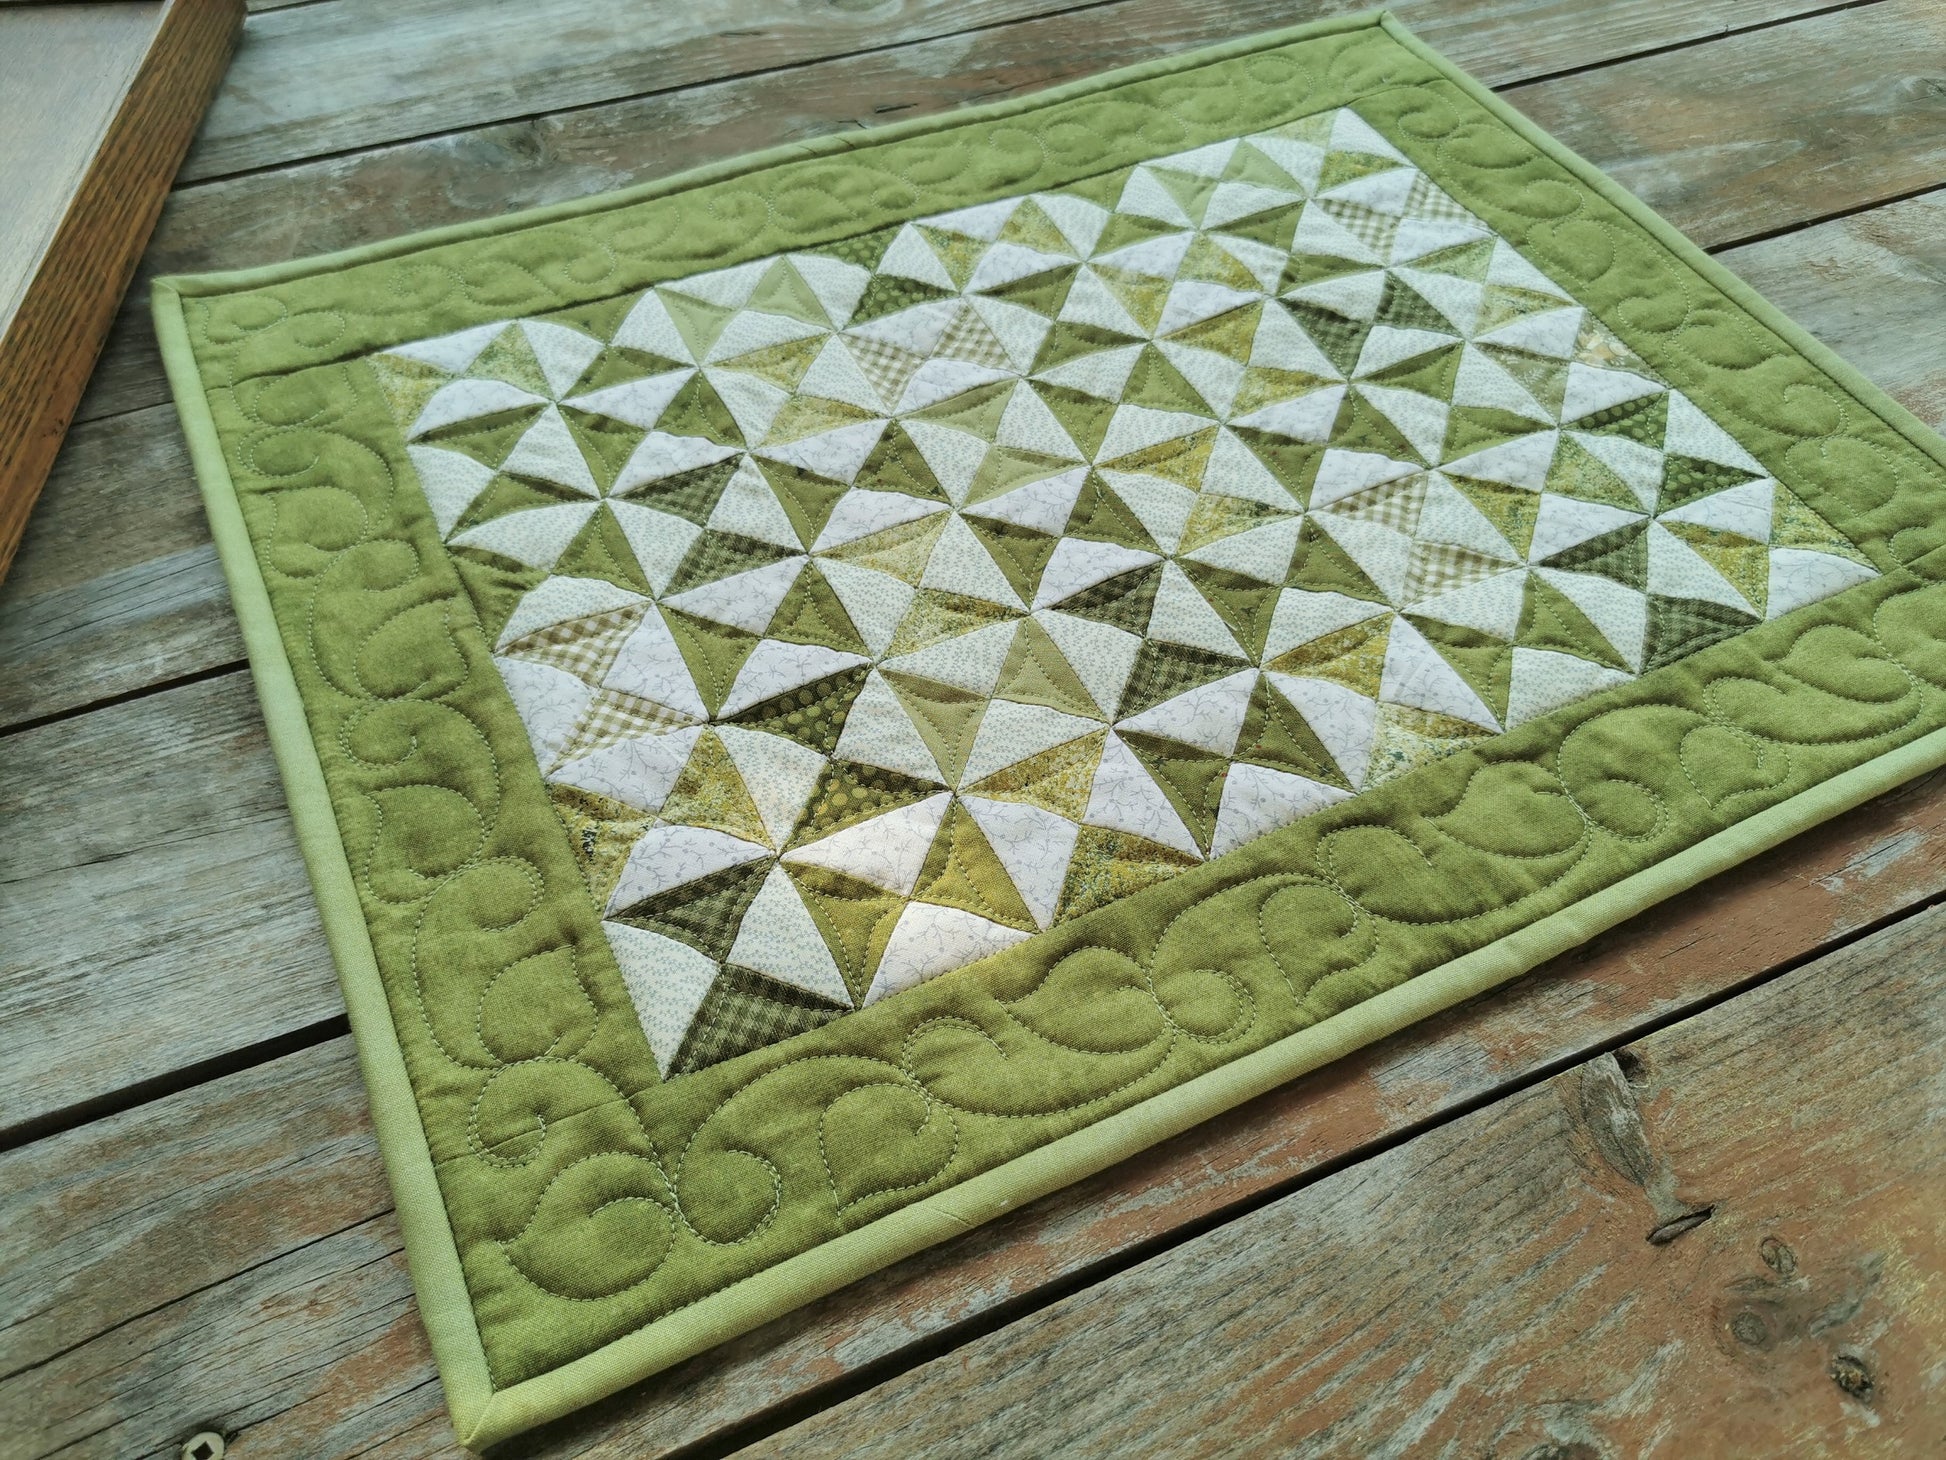 This quilted table runner has small scrappy green triangles in hourglass shapes are surrounded by a solid tone on tone green border that has pretty custom quilting.